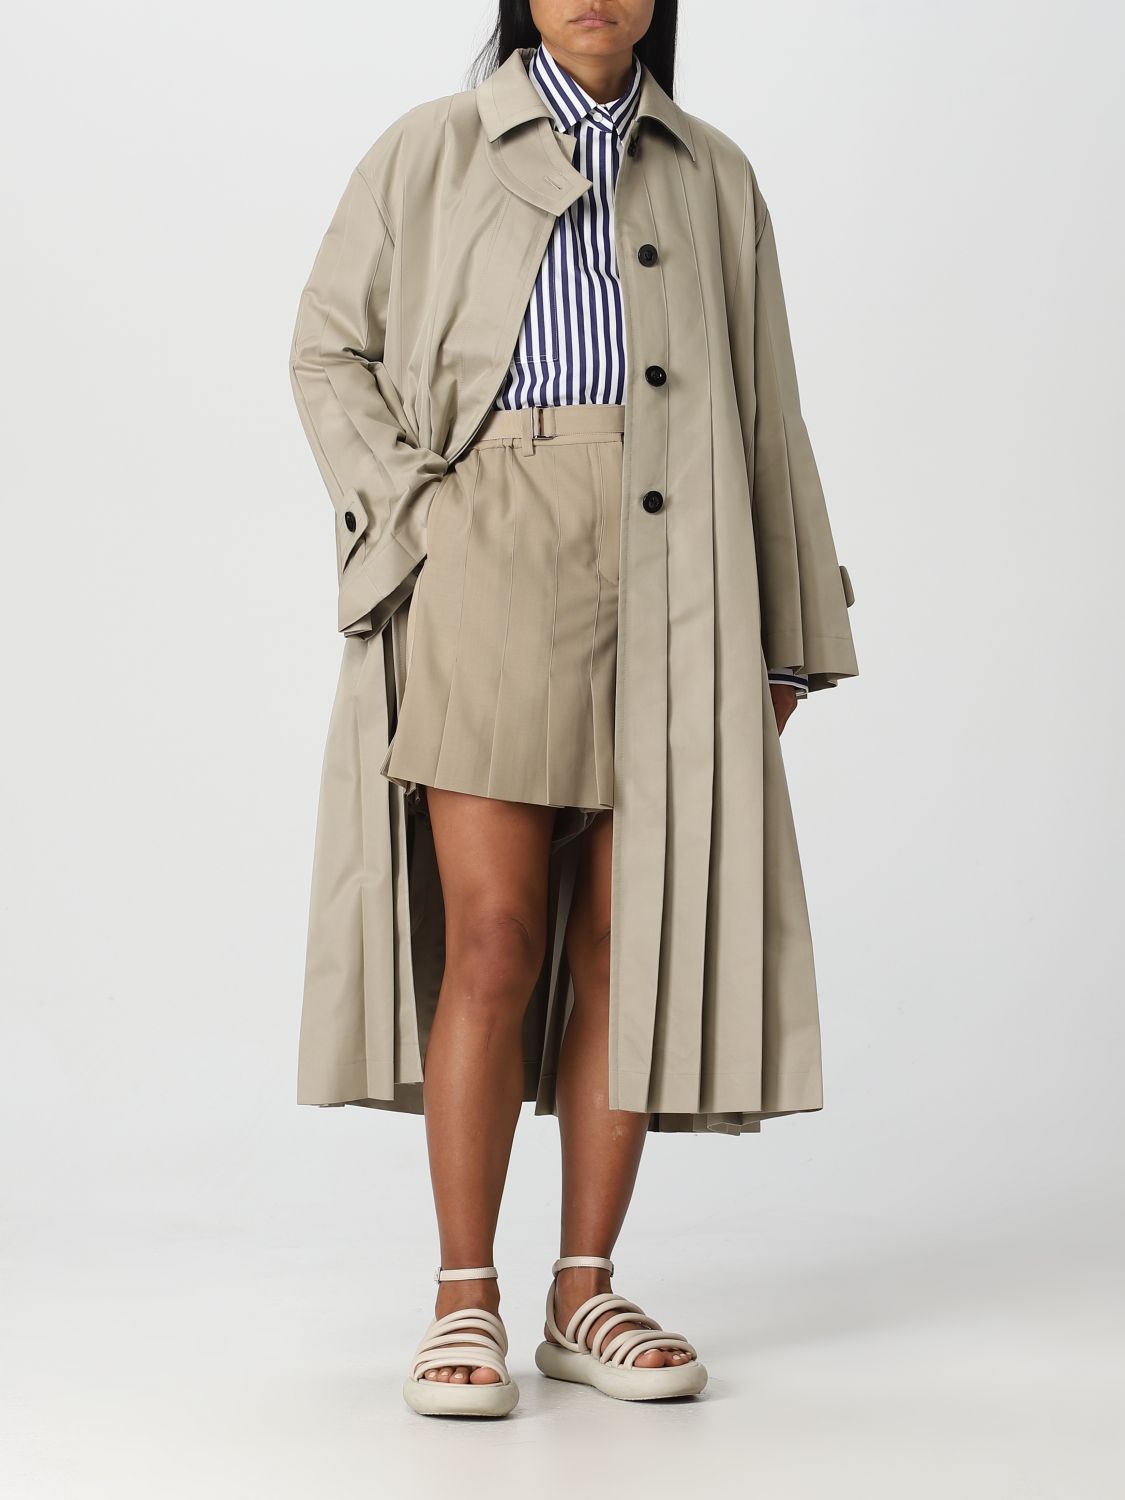 Sacai Outlet: trench coat for woman   Beige   Sacai trench coat